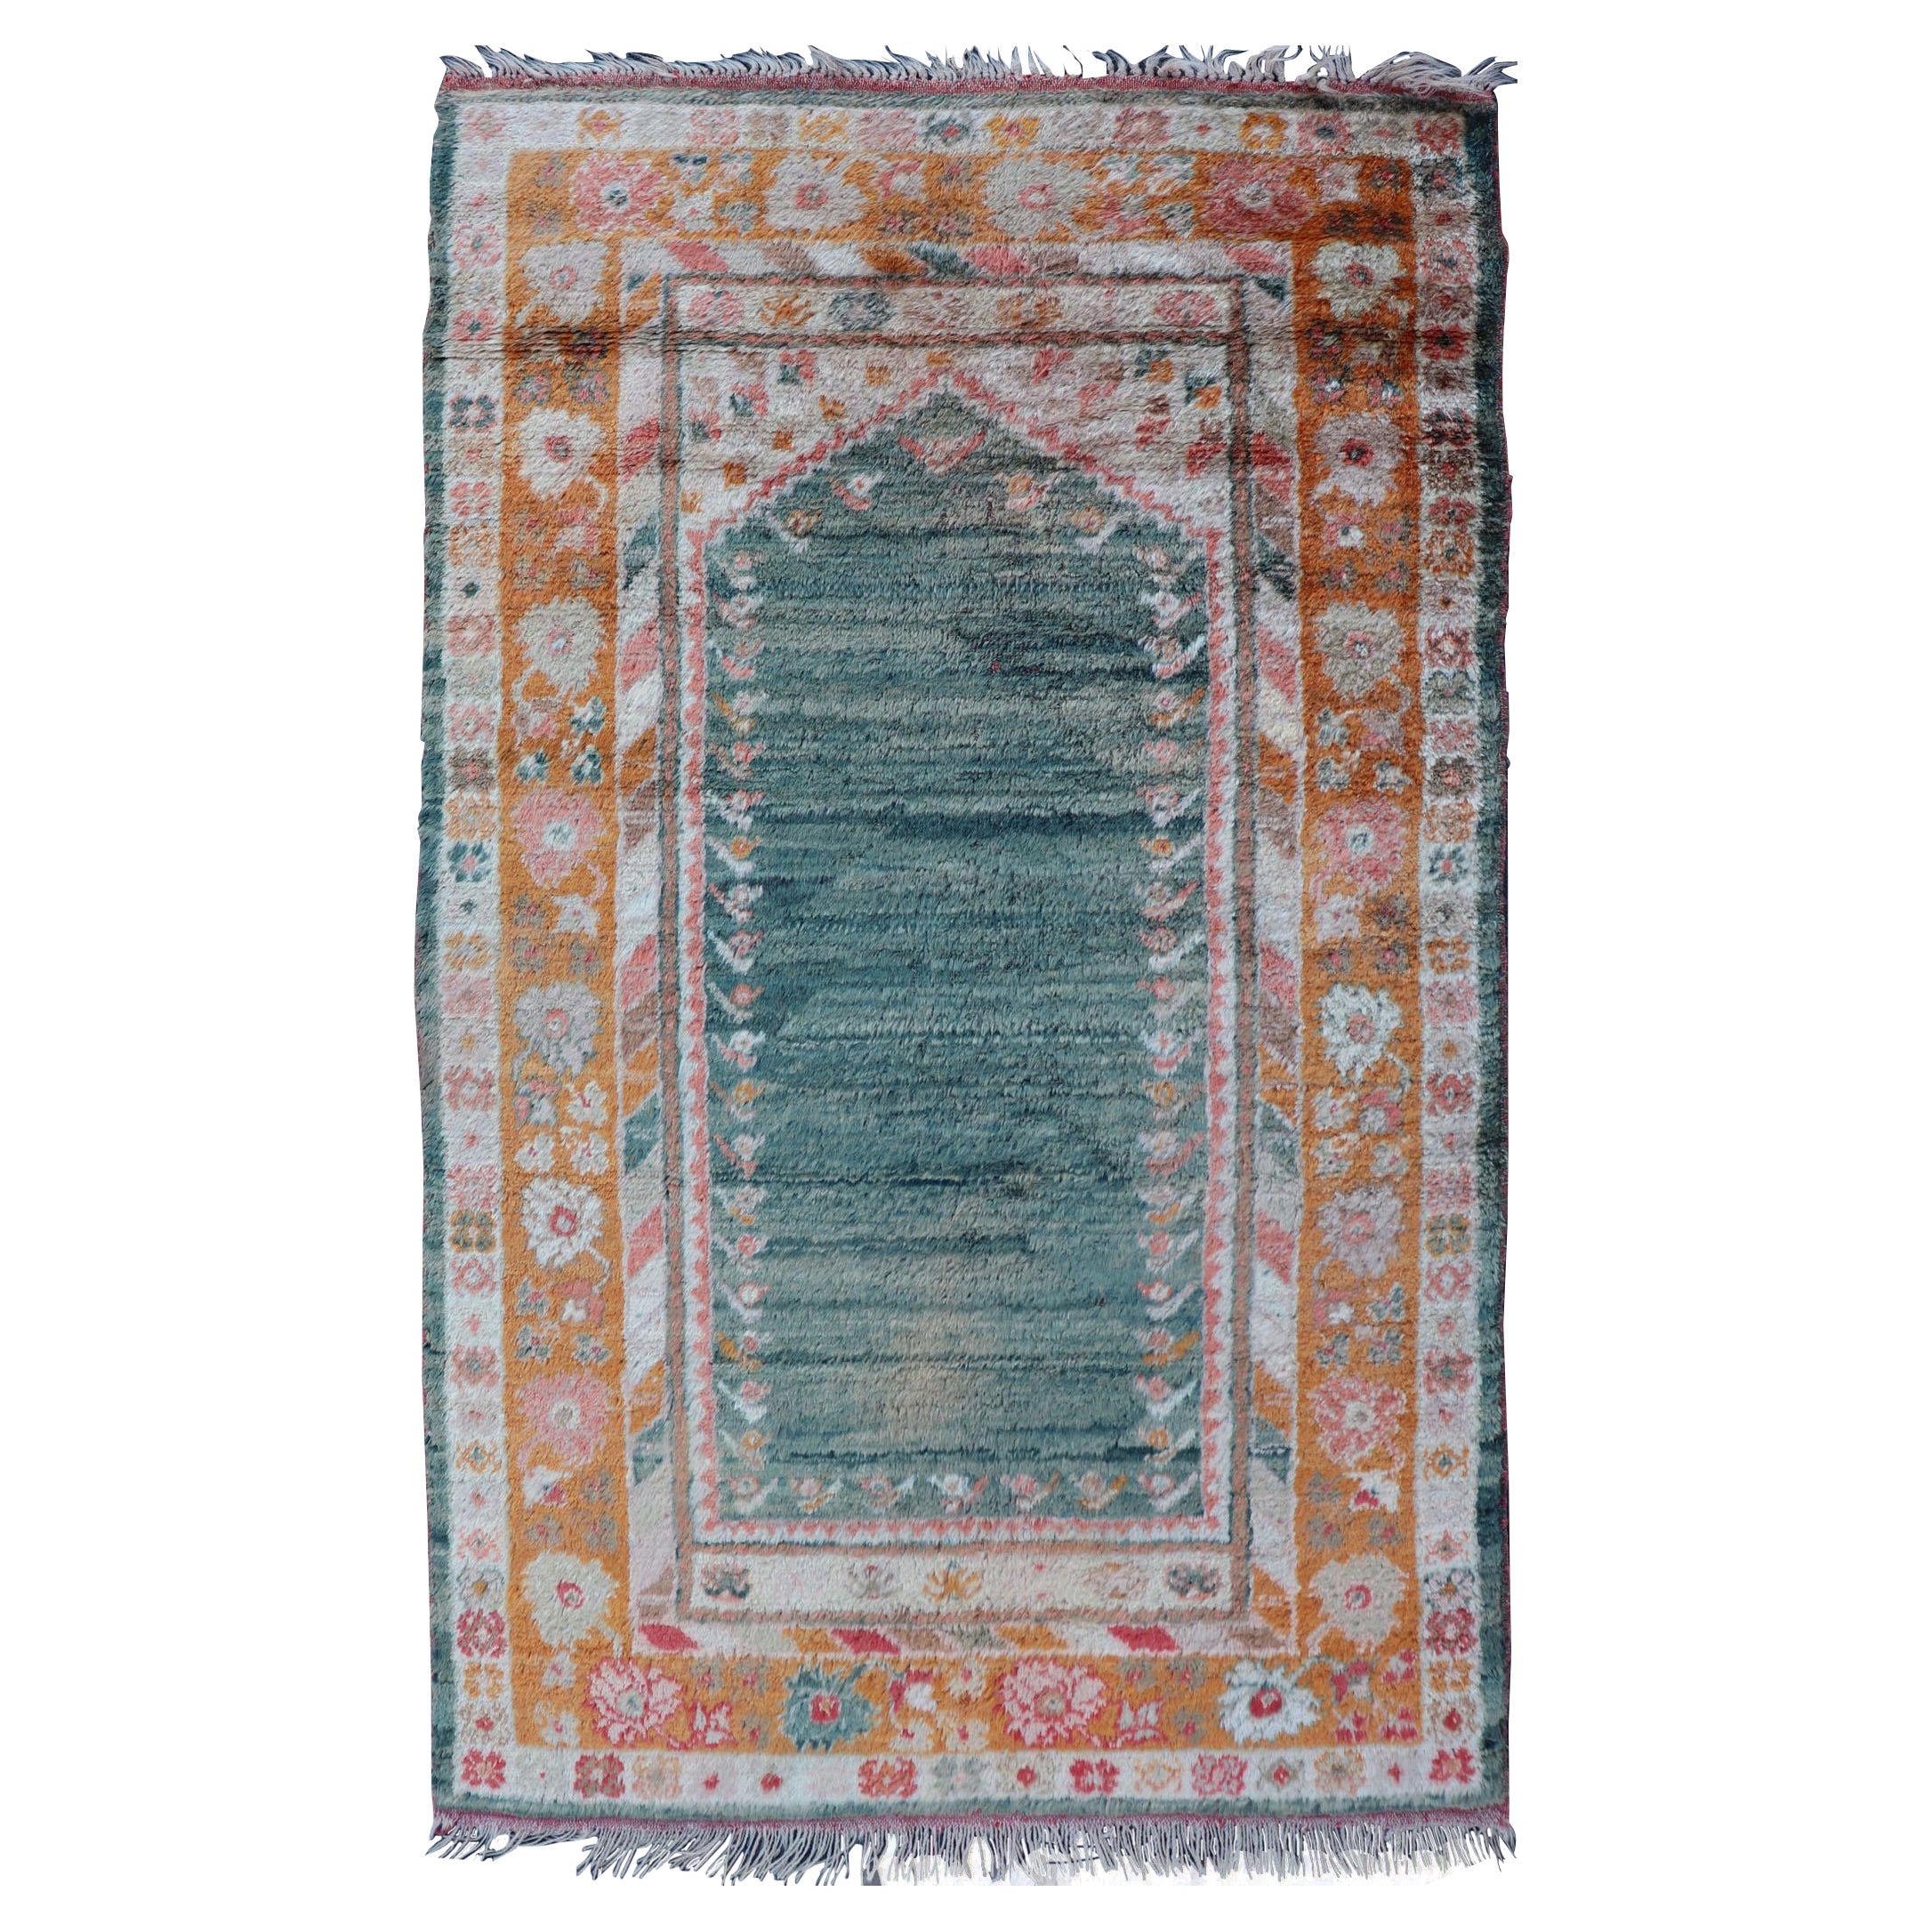 Antique Angora Oushak Rug with Solid Background in Teal, Blue, Orange Colors